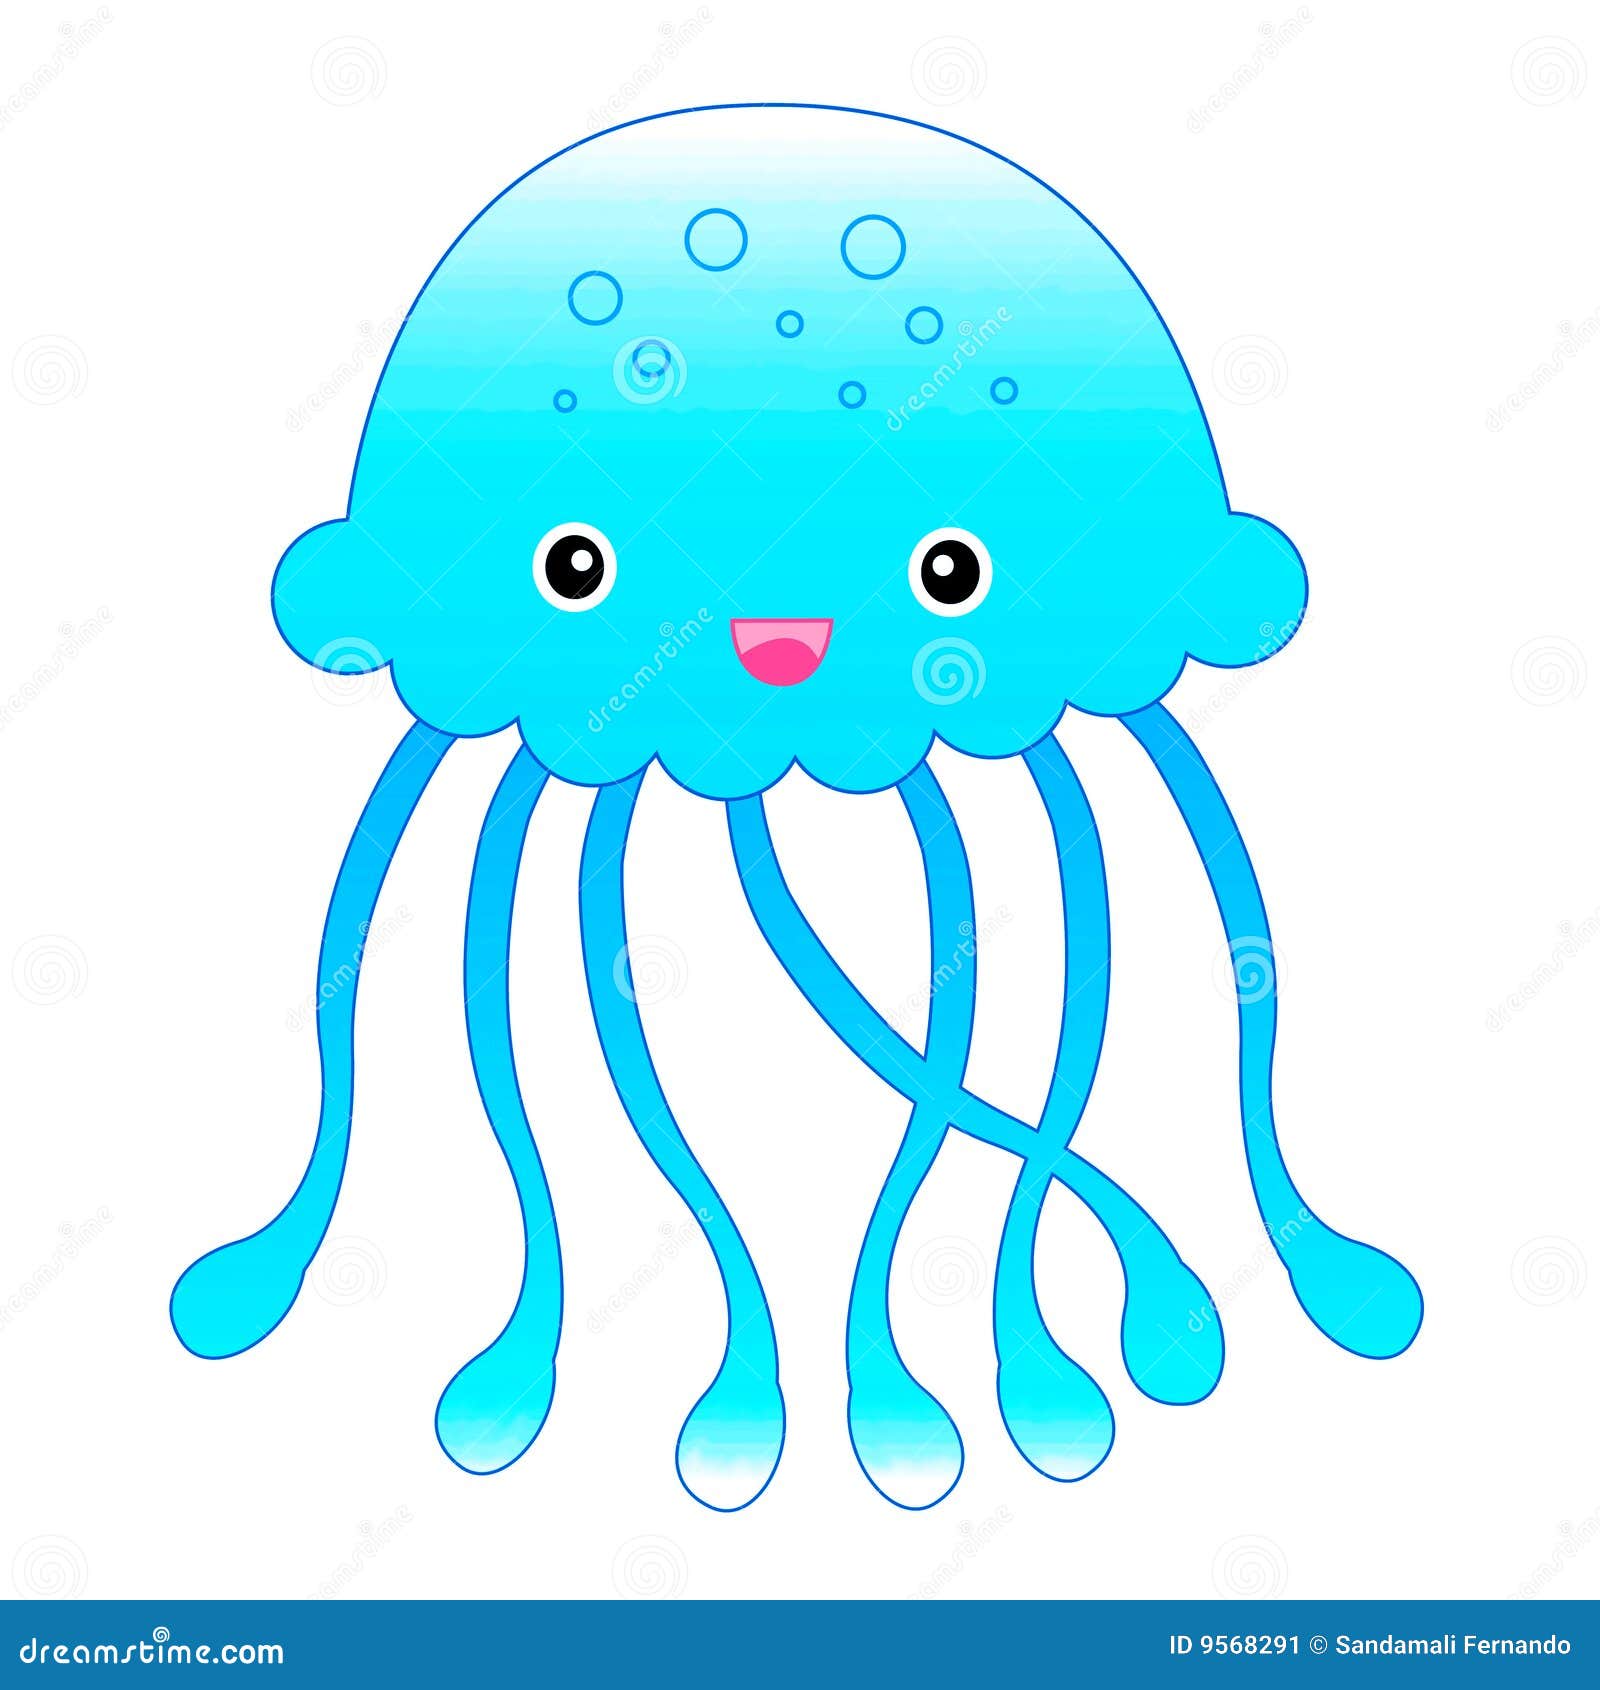 clipart for jellyfish - photo #32